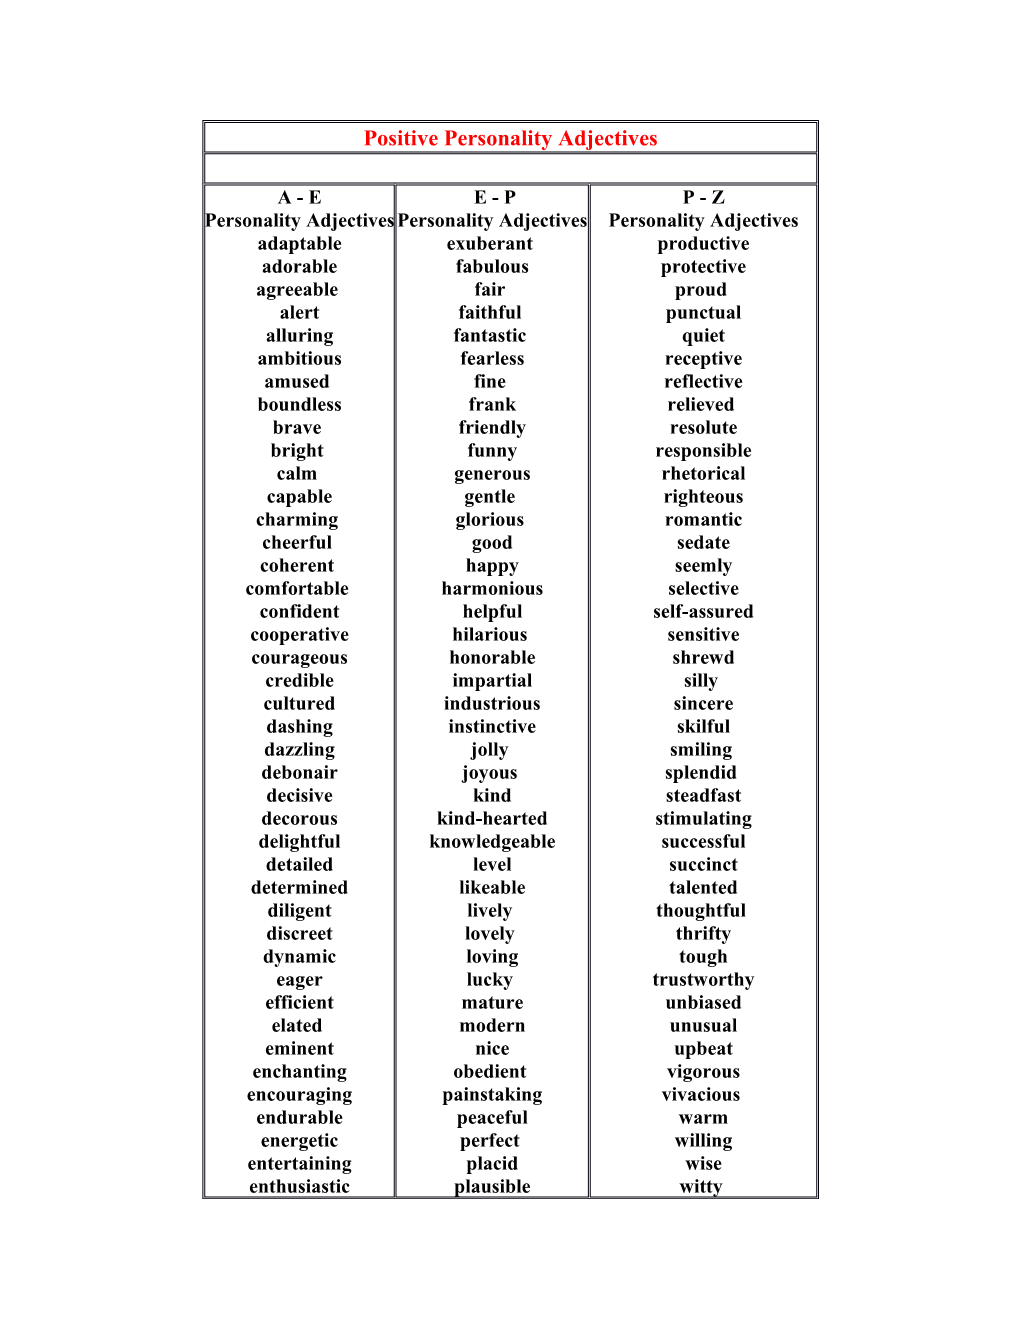 Positive Personality Adjectives